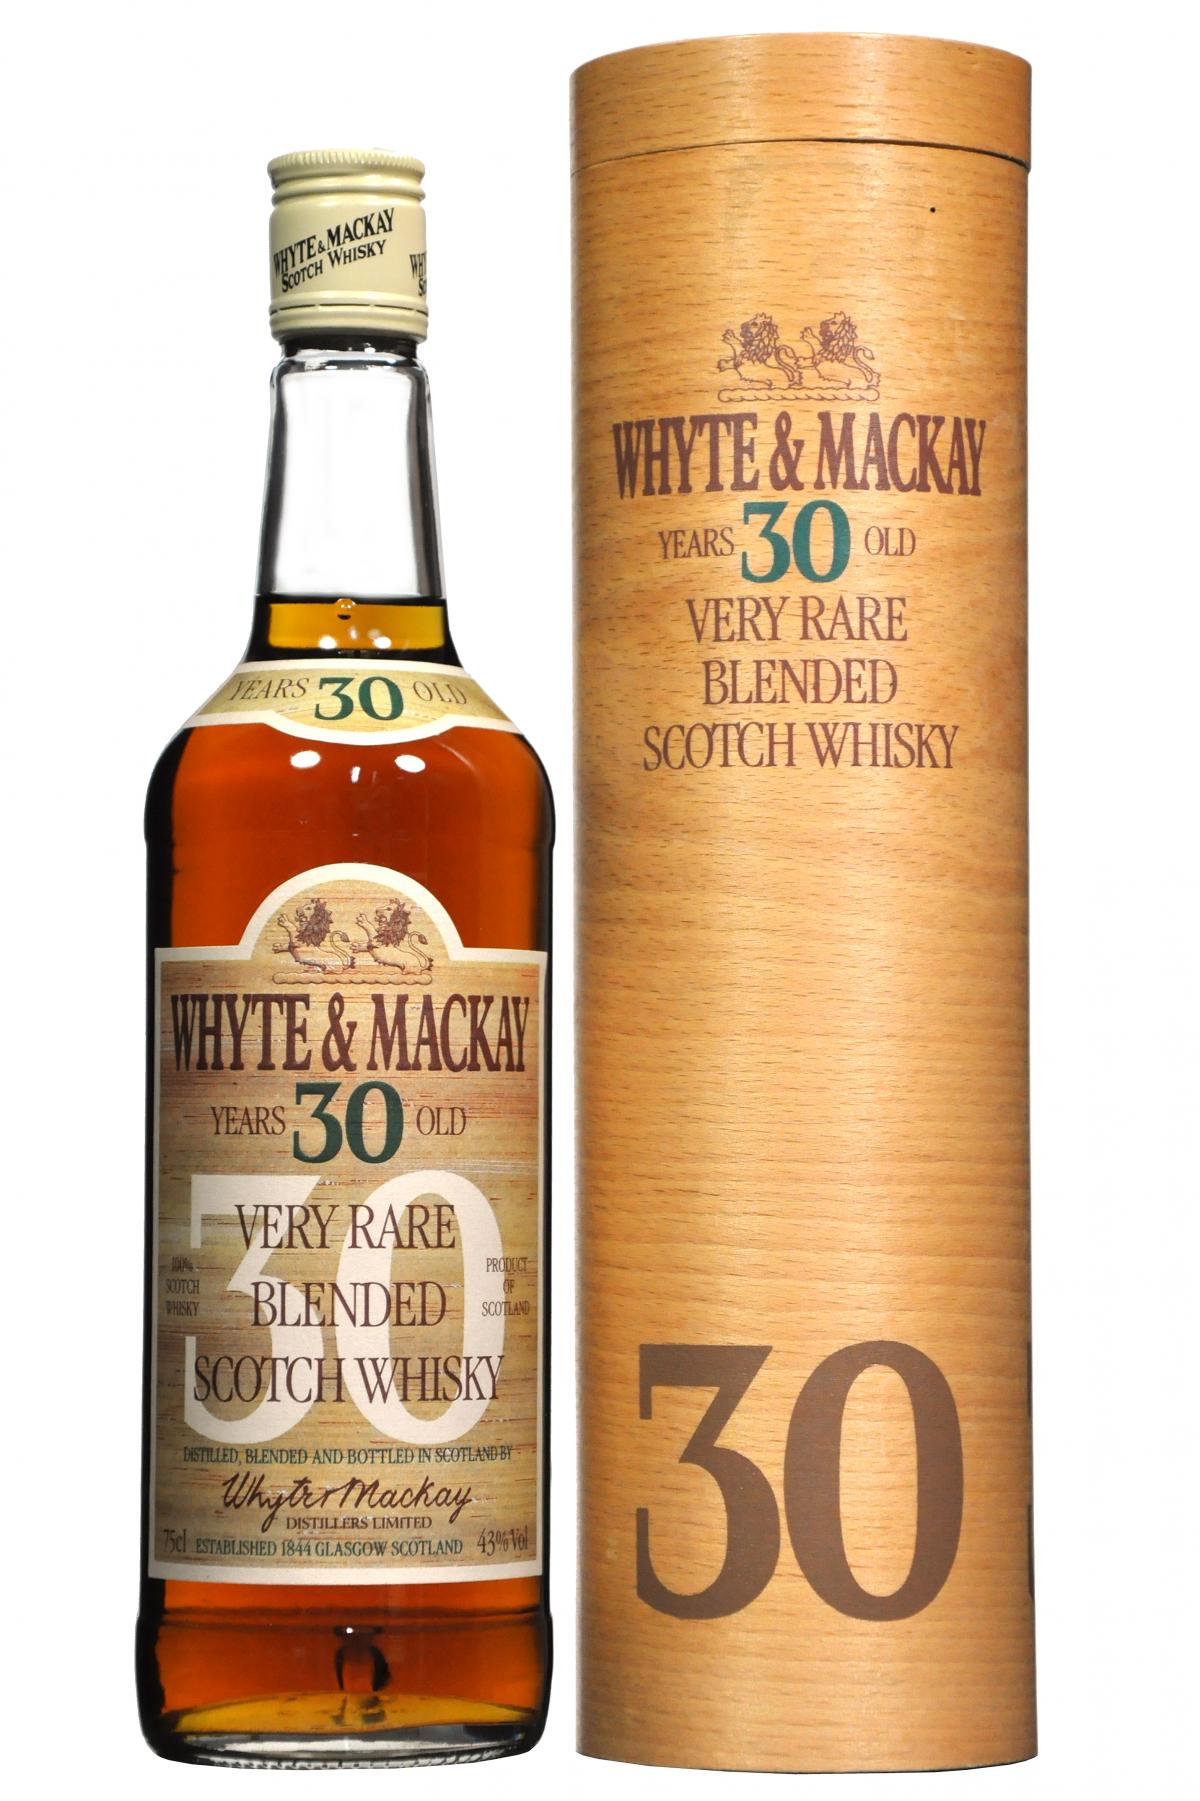 whyte and mackay 30 year old blended scotch whisky whiskey